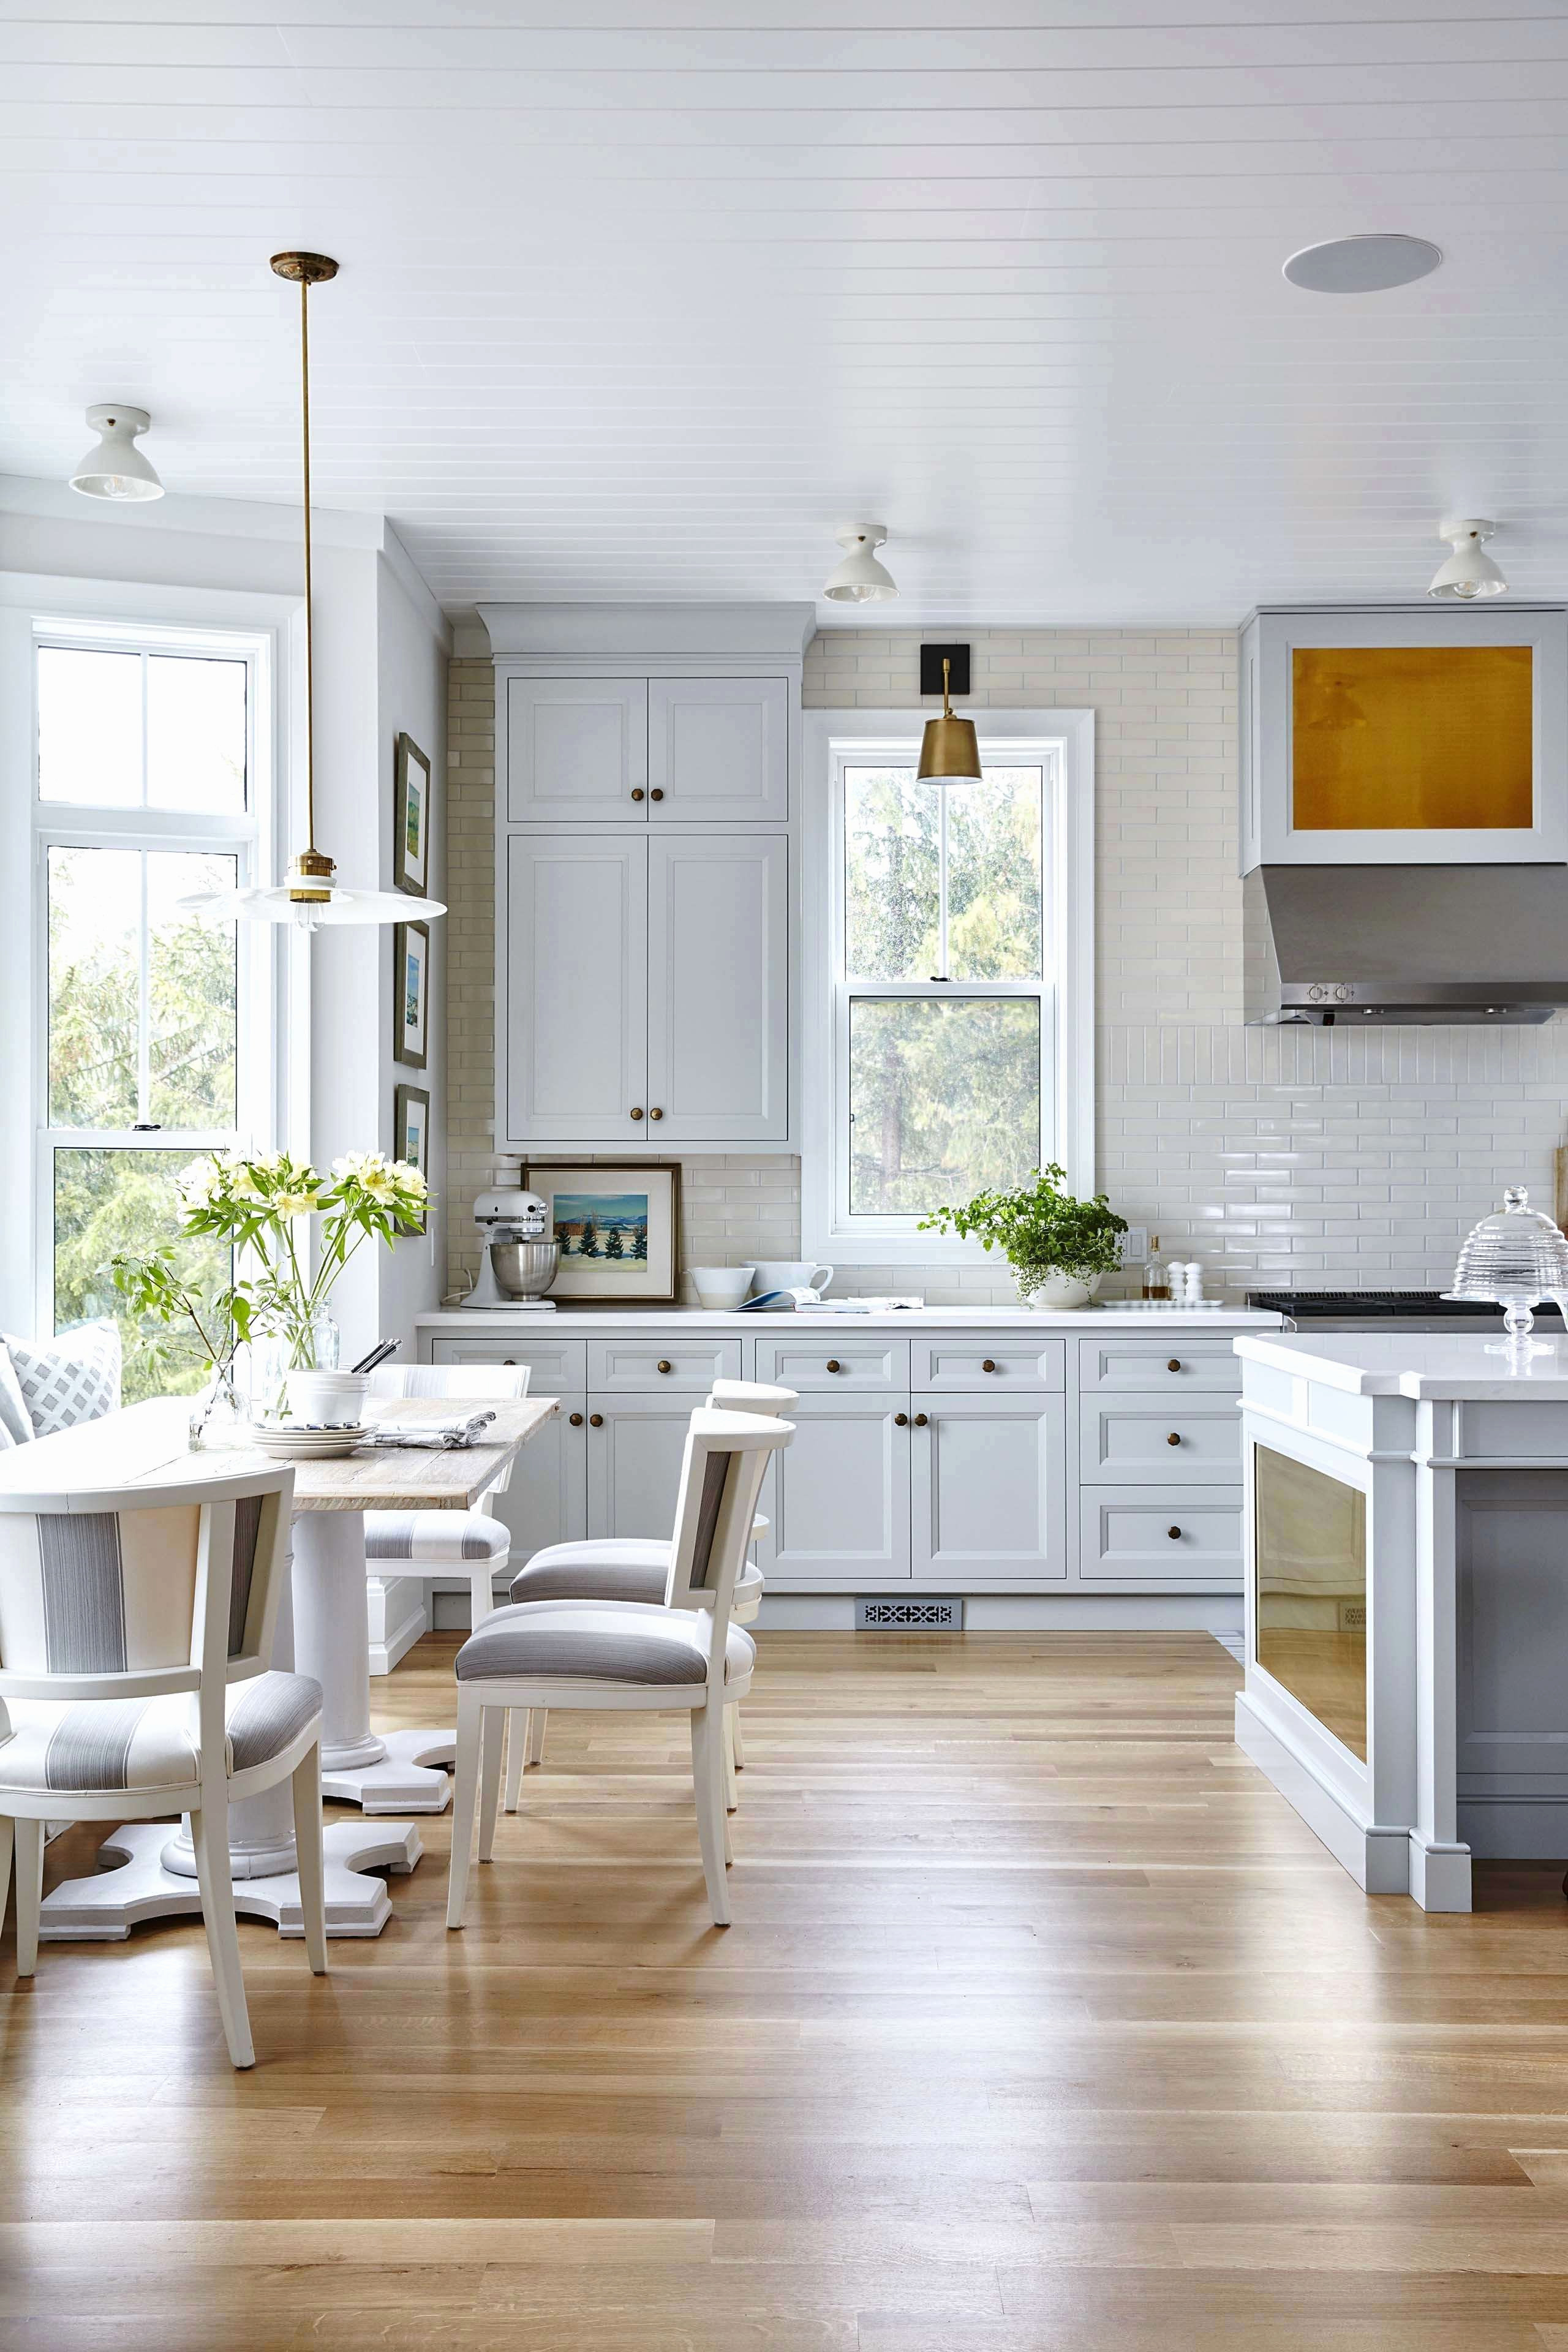 22 Wonderful Pictures Of White Kitchens with Hardwood Floors 2024 free download pictures of white kitchens with hardwood floors of kitchen cabinets ideas fresh kitchen cabinet layout new kitchen joys for kitchen cabinets ideas fresh kitchen cabinet layout new kitchen jo